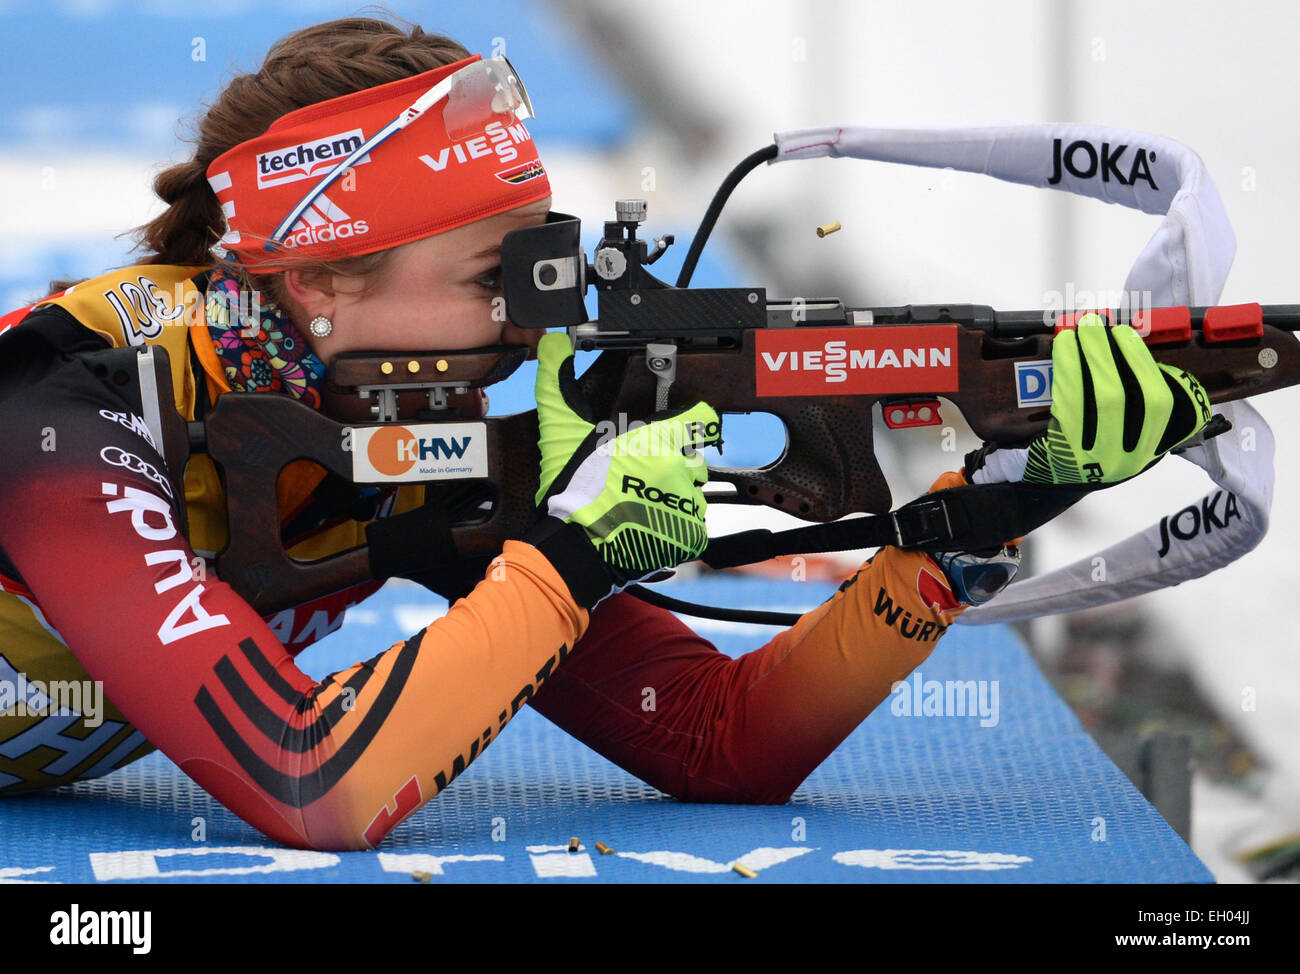 Kontiolahti, Finland. 04th Mar, 2015. German biathlete Luise Kummer in action during a training session at the Biathlon World Championships in Kontiolahti, Finland, 04 March 2015. Photo: RALF HIRSCHBERGER/dpa/Alamy Live News Stock Photo